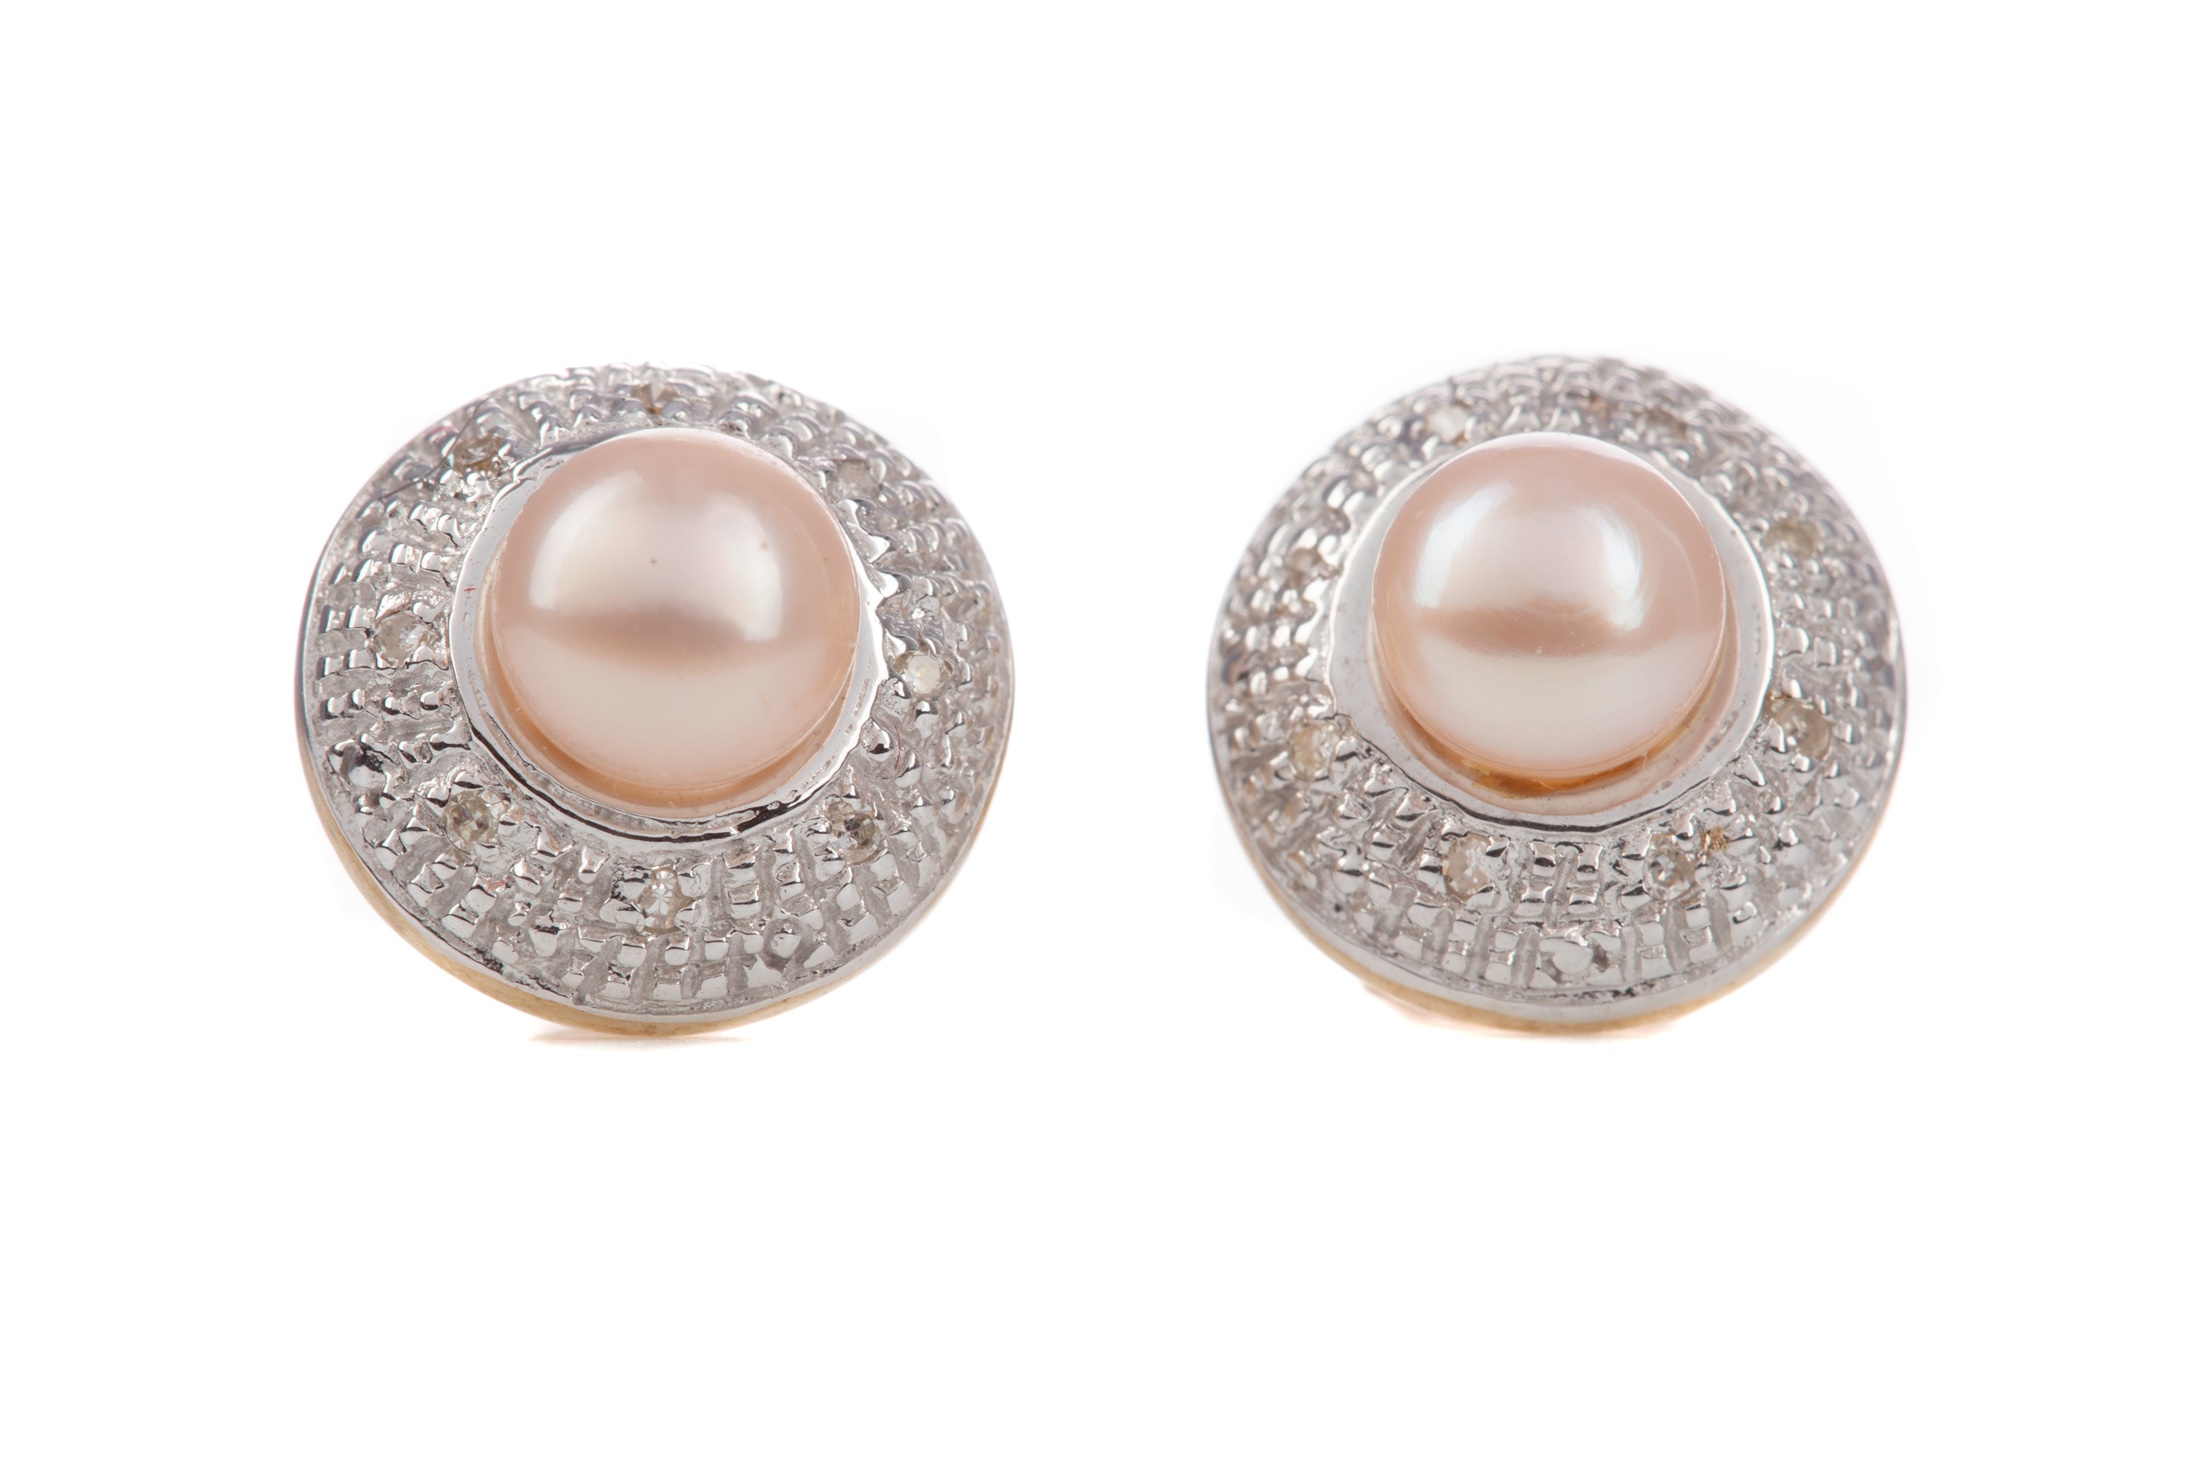 A PAIR OF PEARL AND DIAMOND STUD EARRINGS